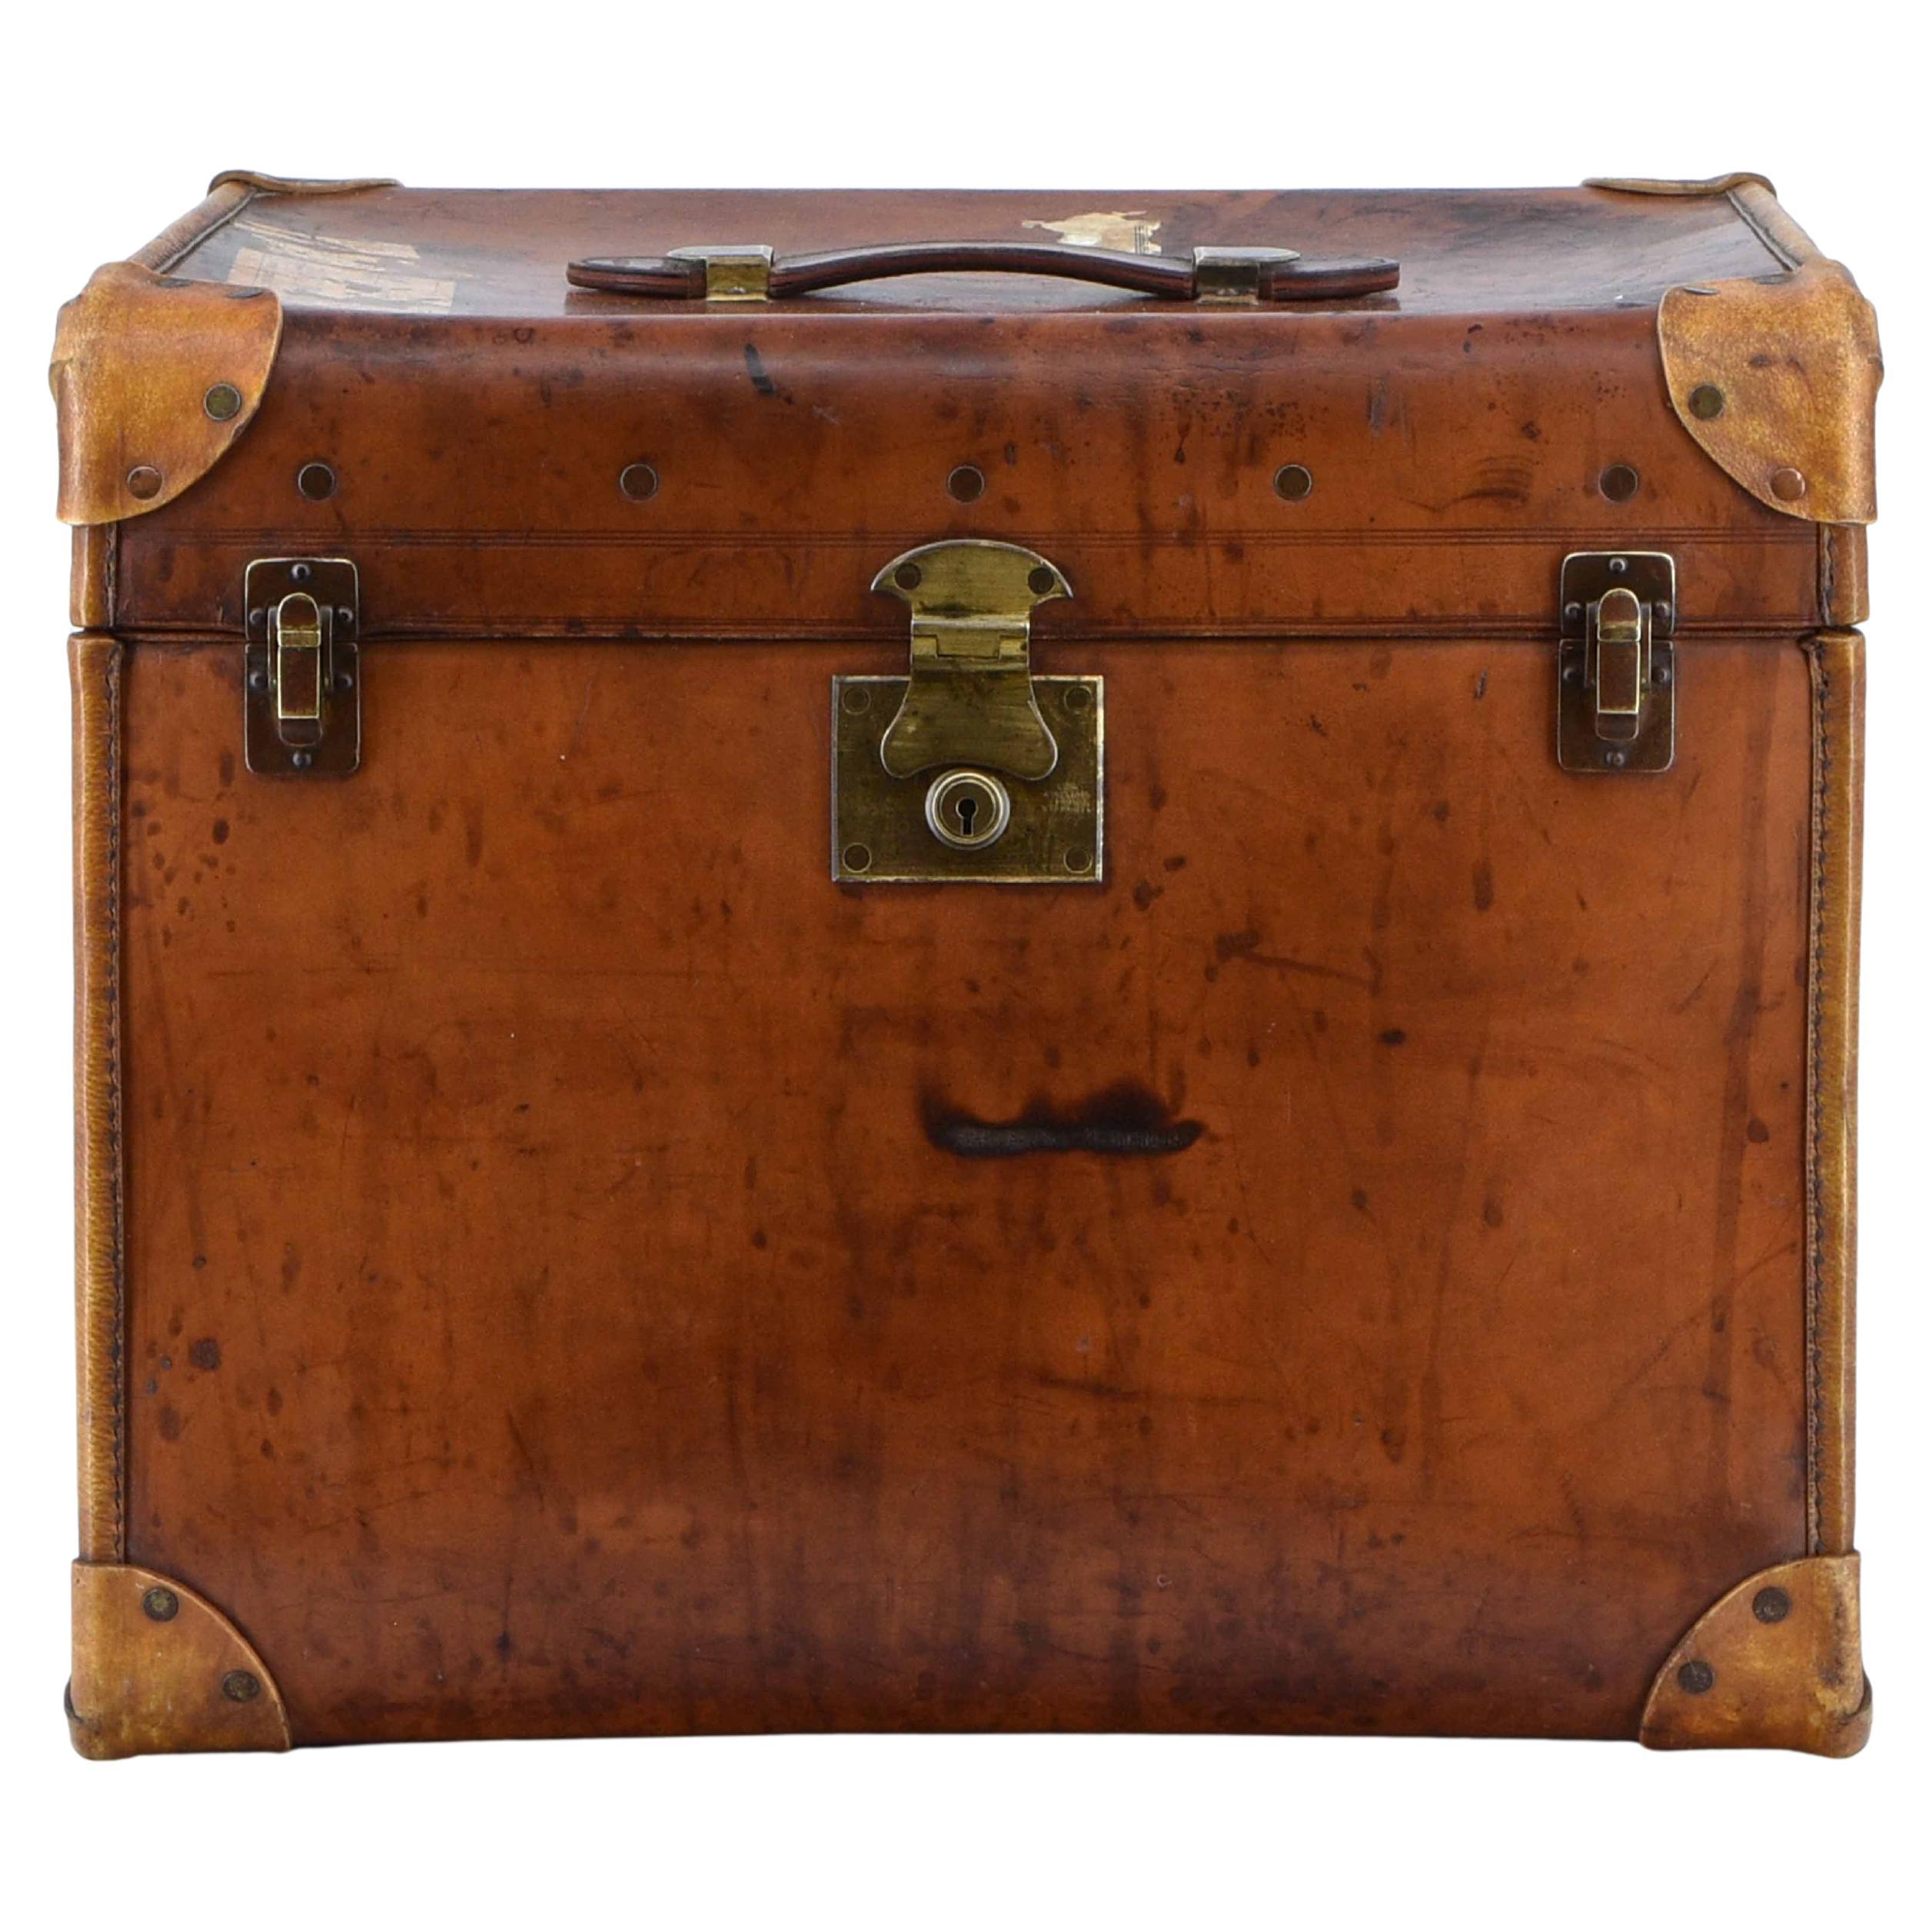 A good quality leather luggage trunk dating from the 1930's. 

The trunk has the original lined interior, brass catches and lock. A more unusual shape than most, it would work well as a coffee table or sofa table (as you can see, it looks like it